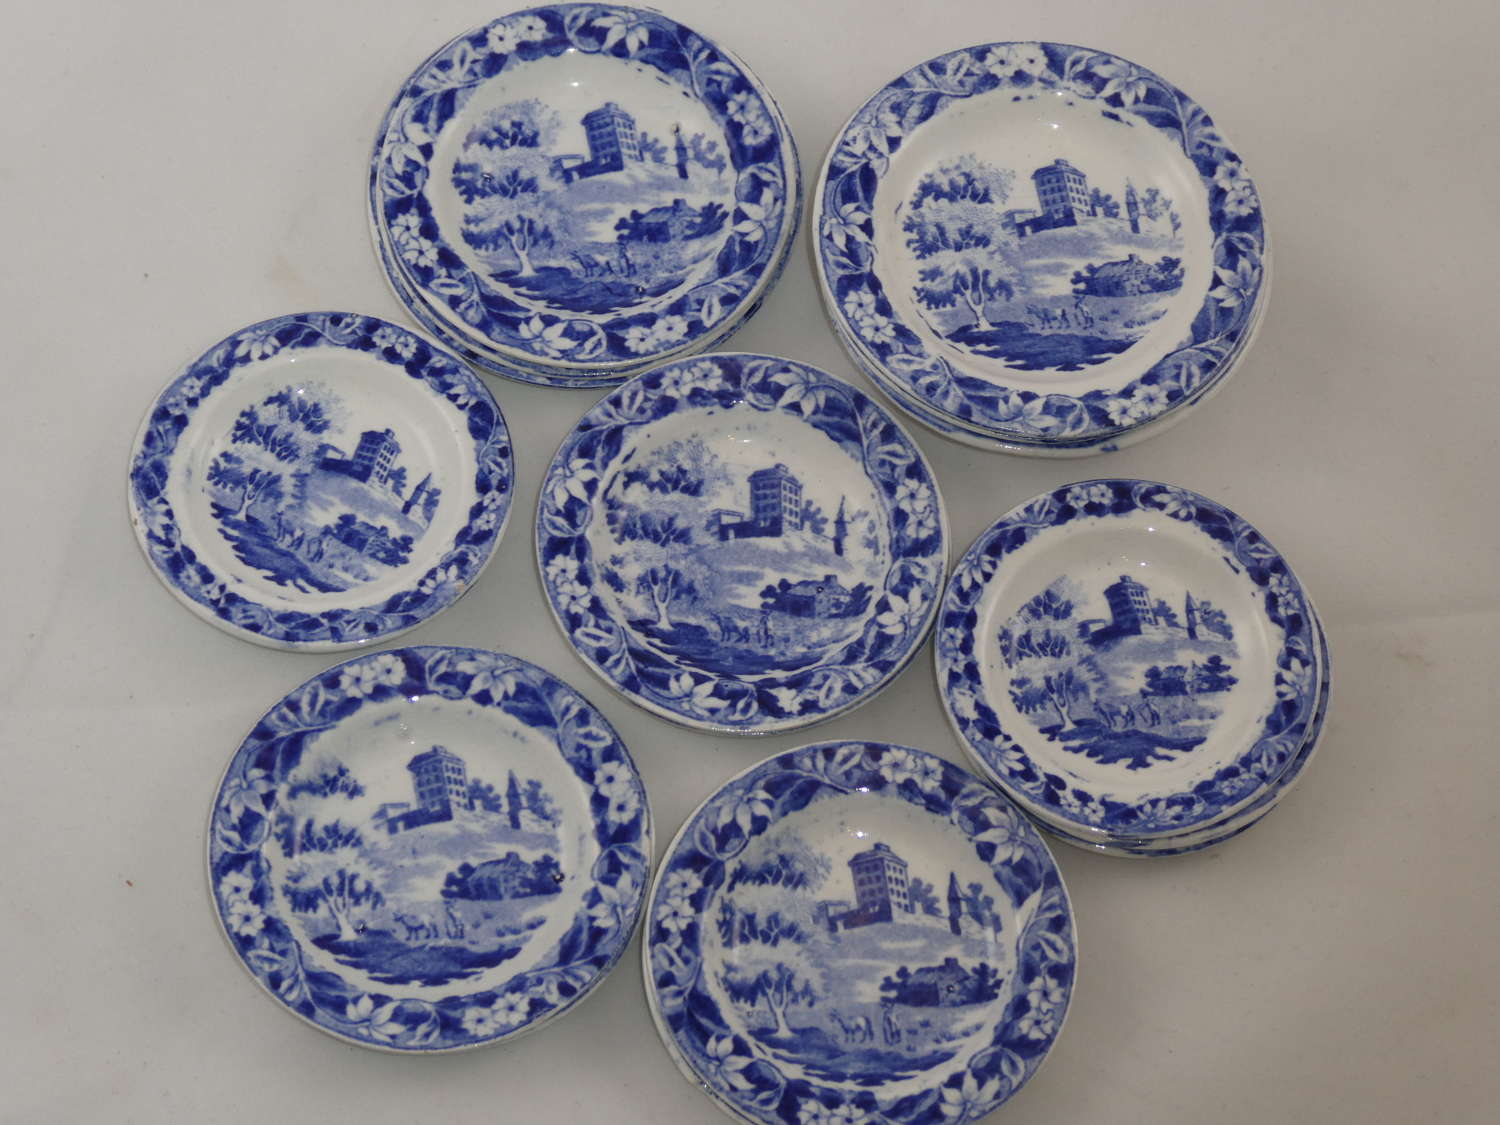 Collection of Hackwood Miniature Plates